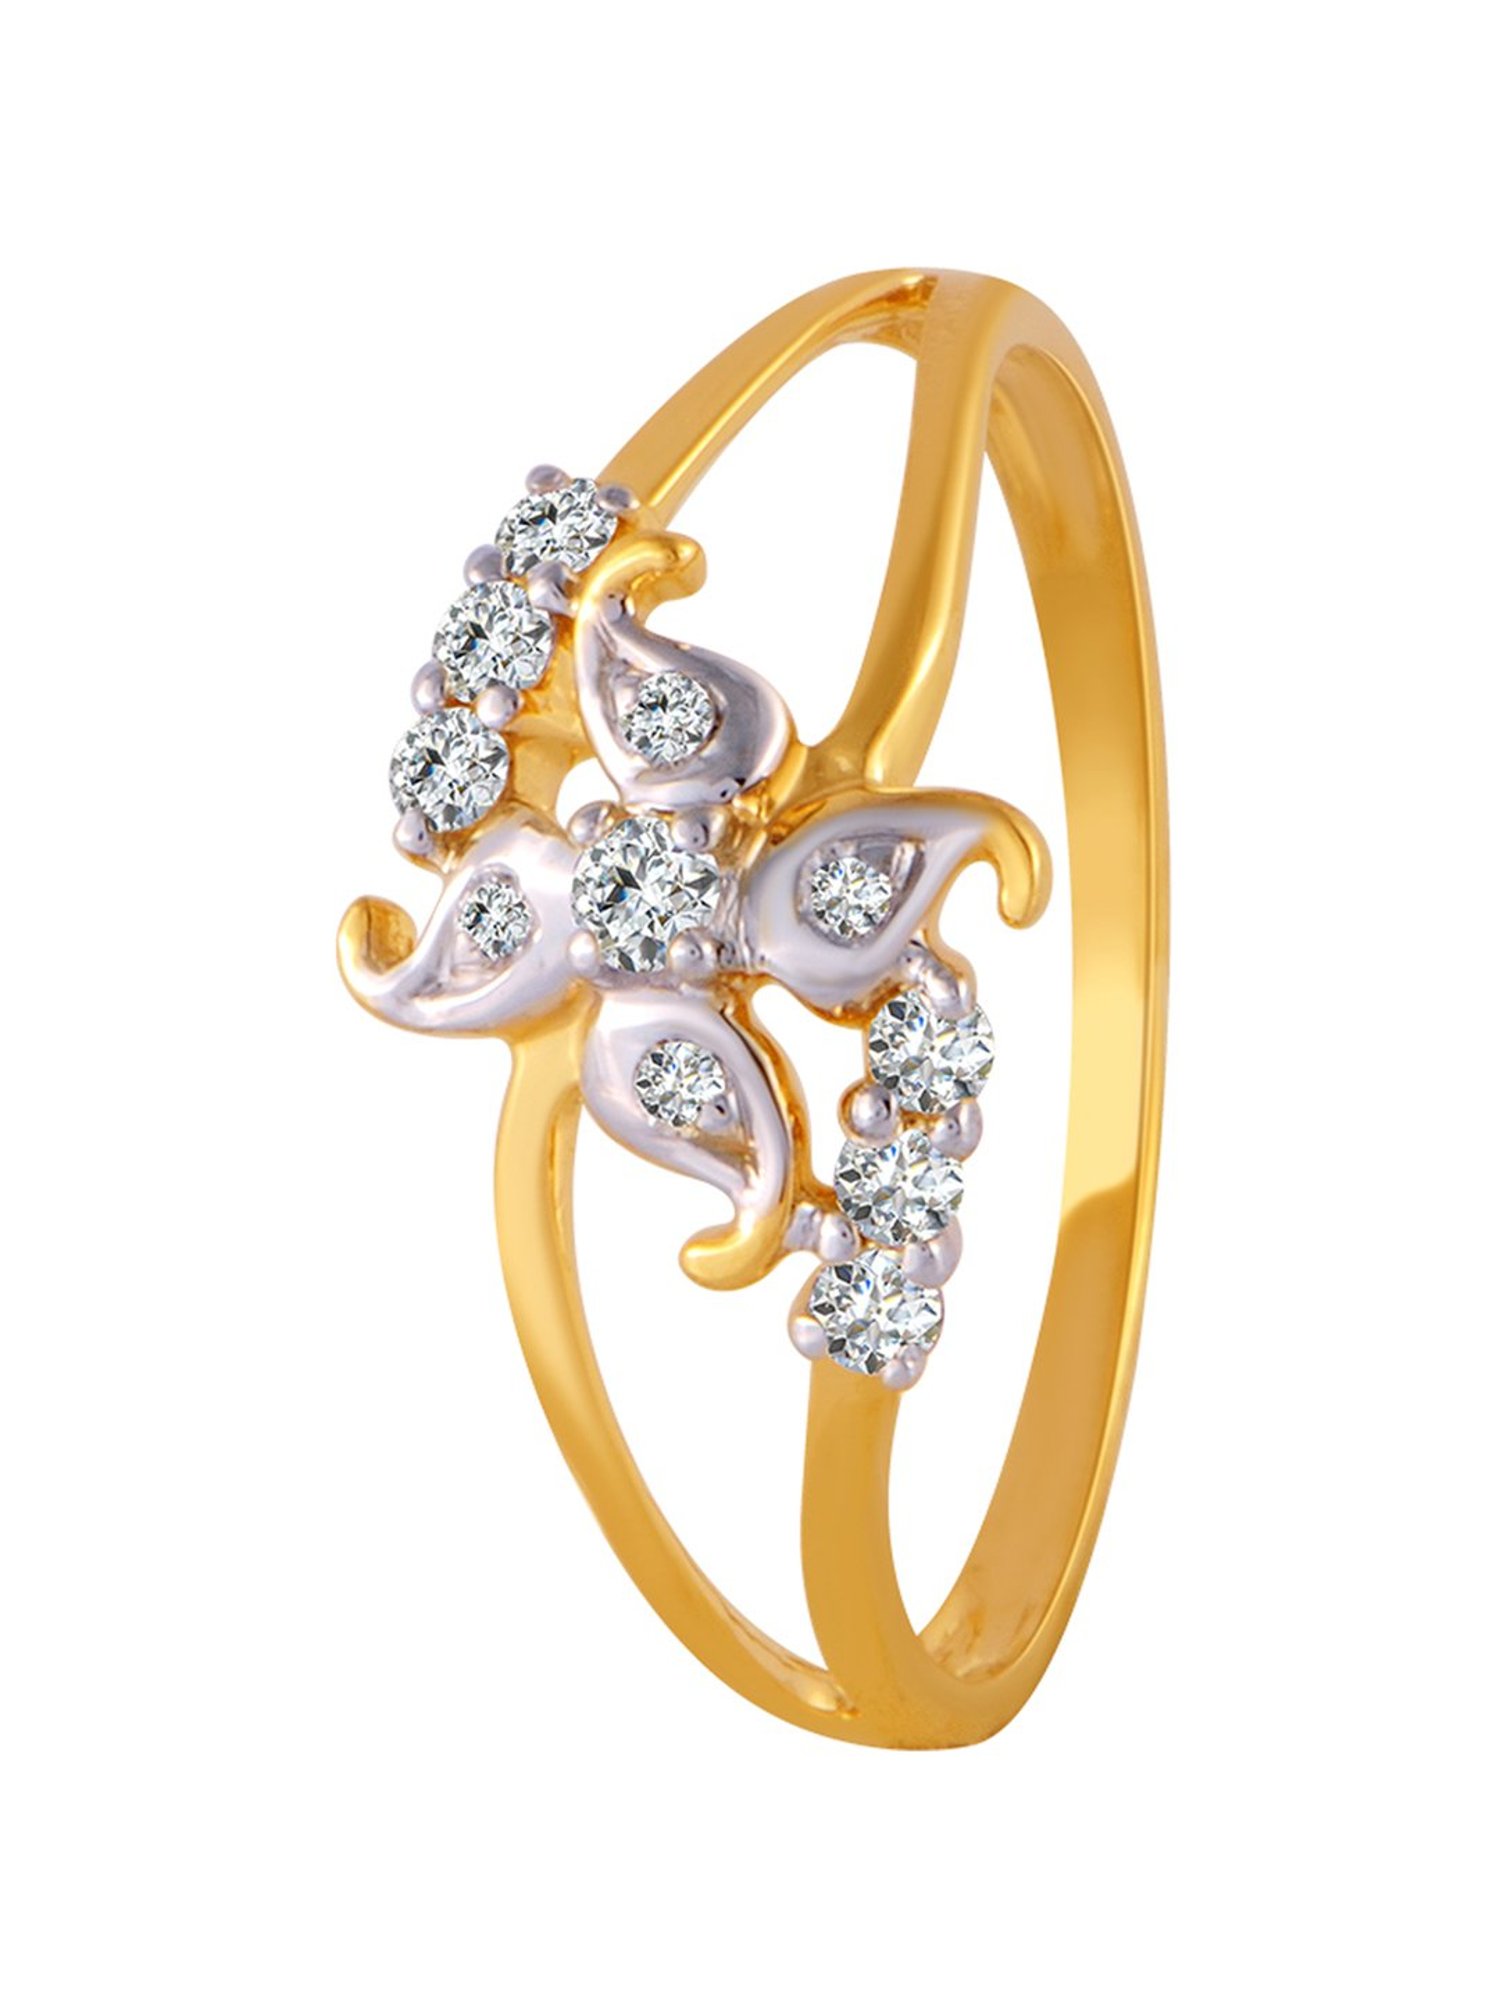 PC Chandra Jewellers Diamond Collection 18kt White Gold ring Price in India  - Buy PC Chandra Jewellers Diamond Collection 18kt White Gold ring online  at Flipkart.com